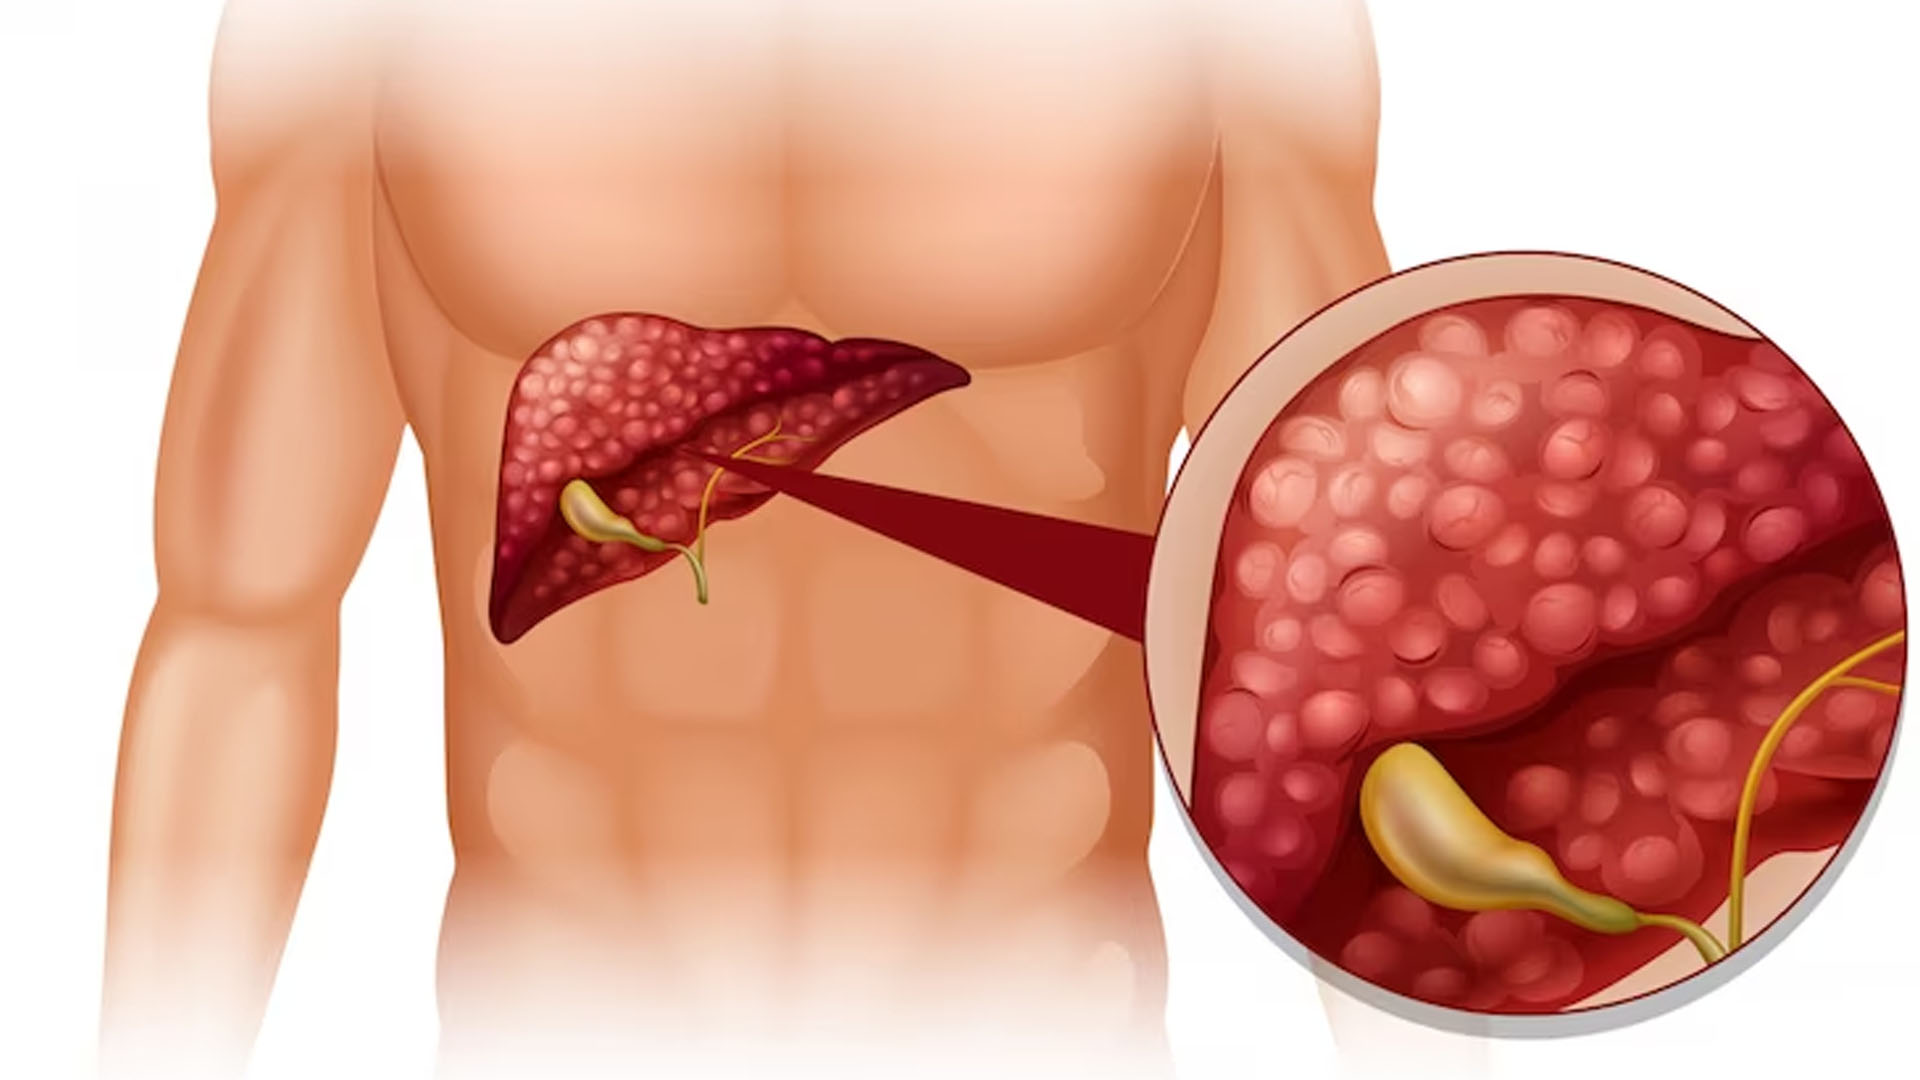 What are the Home Remedies for Gallstones?